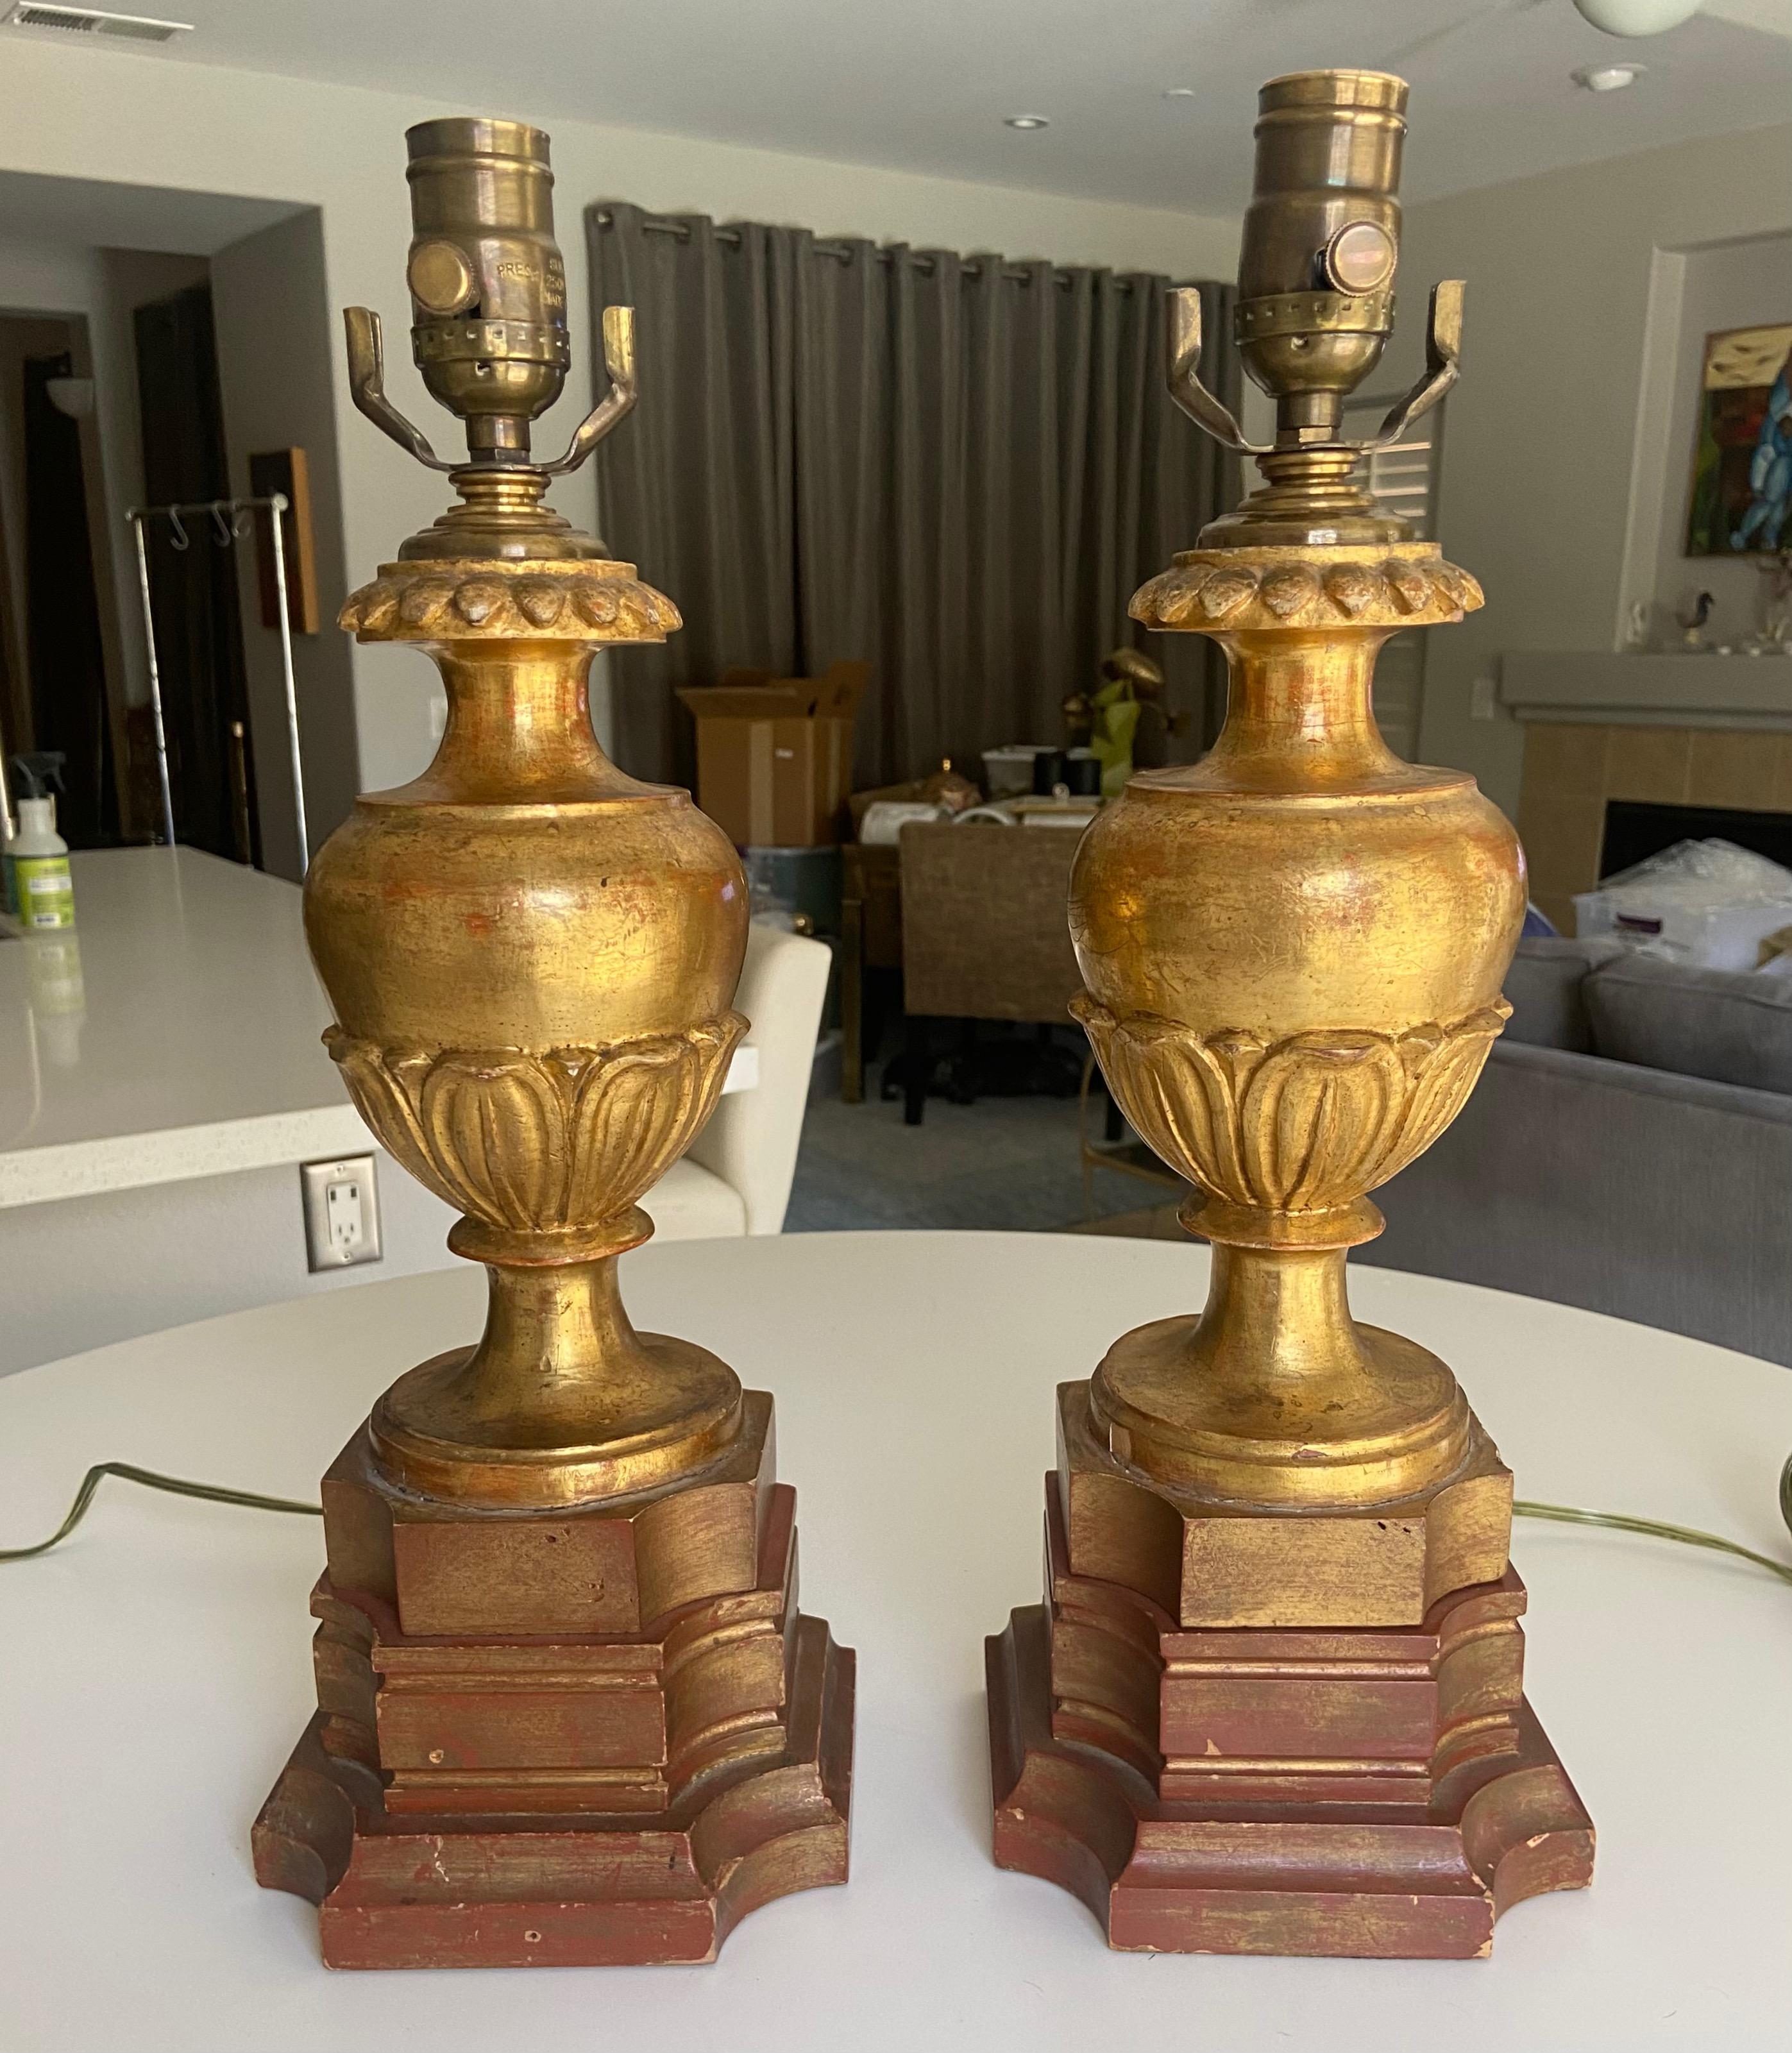 Pair of Italian water gilt carved wood candlesticks converted to lamps with later custom wood bases in a coordinating painted finish. Brass hardware fittings.